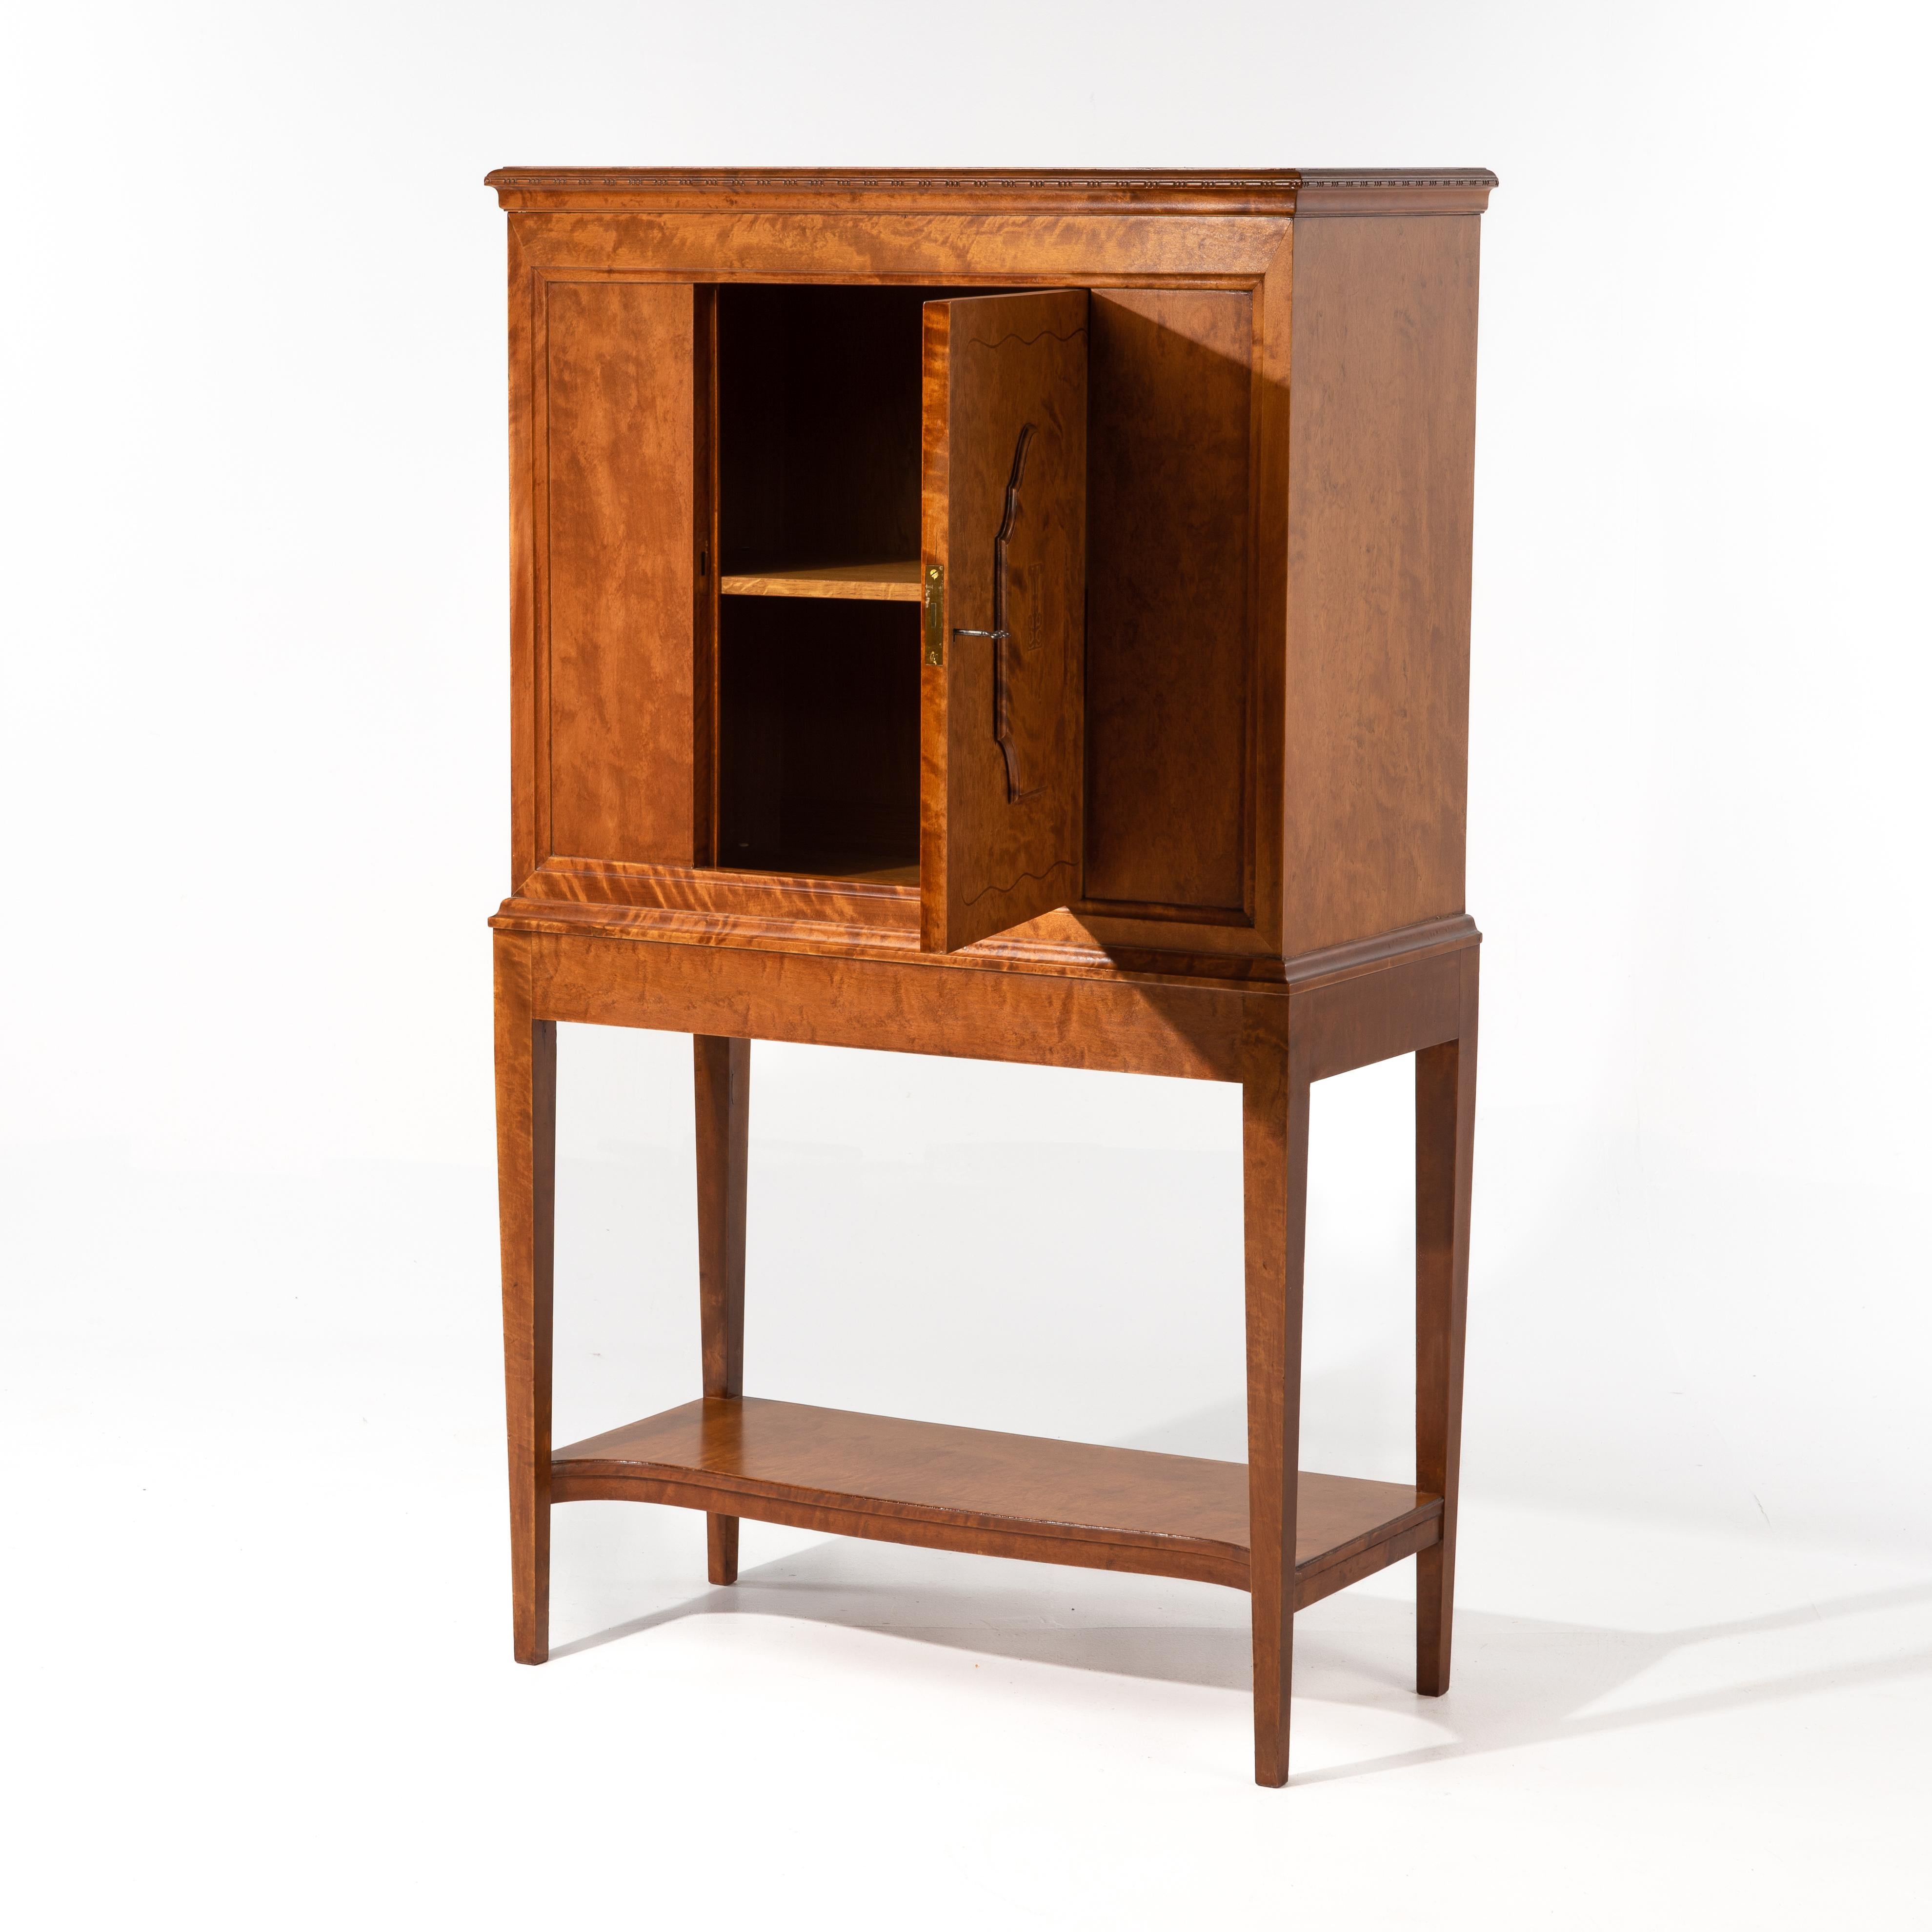 This early cabinet is by A. B. Nordiska Kompaniet attributed to Carl Bergsten, 1918. Figural birch with inlay. The door opening is 12.5